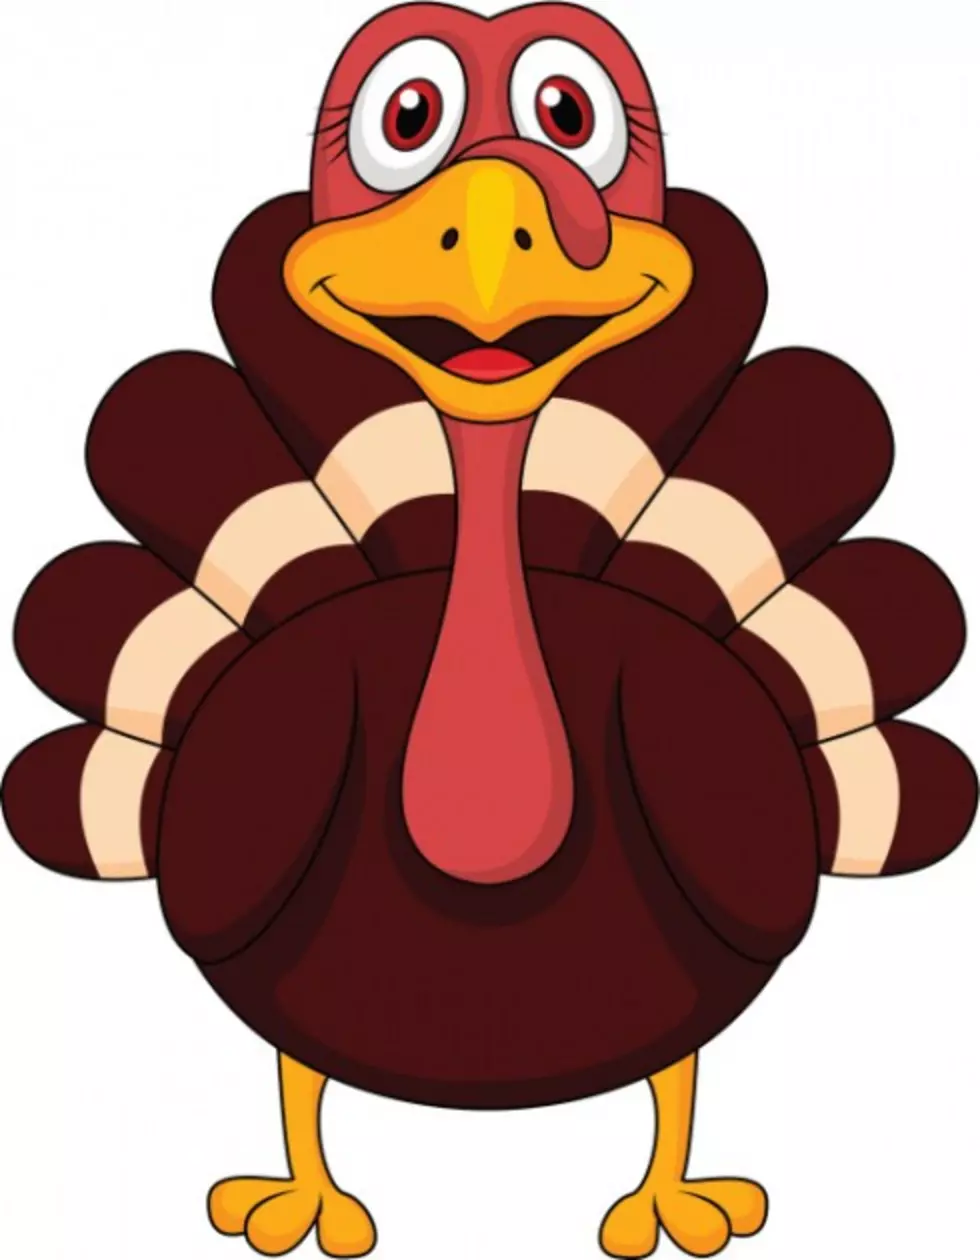 Turkey Trot To Benefit Hospice Families [Audio]